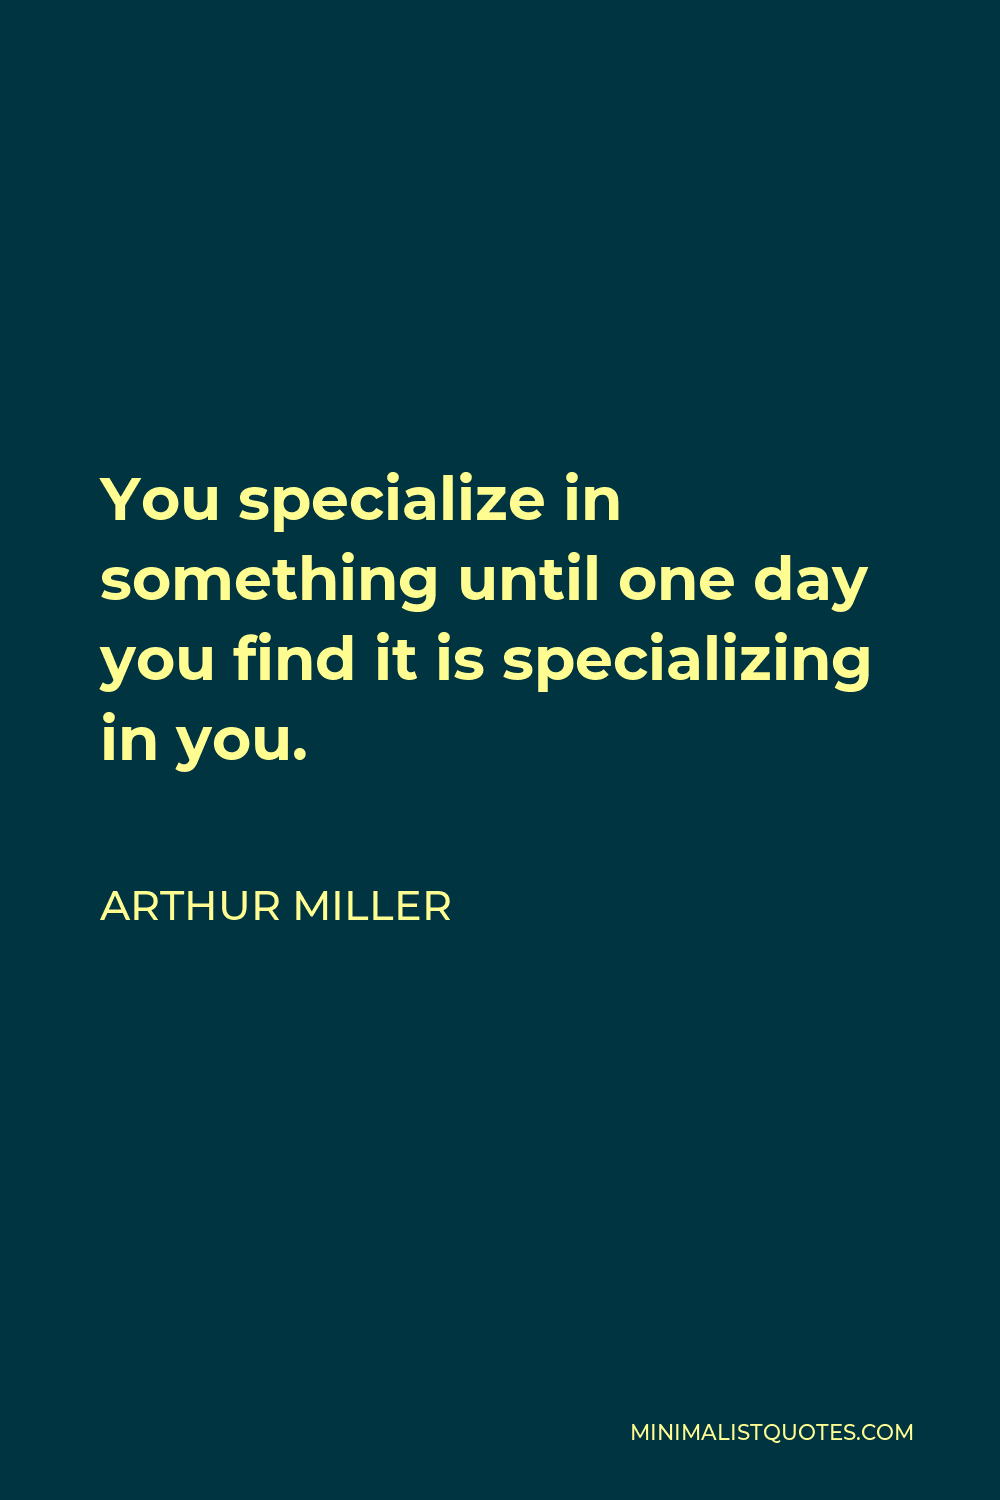 Arthur Miller Quote - You specialize in something until one day you find it is specializing in you.